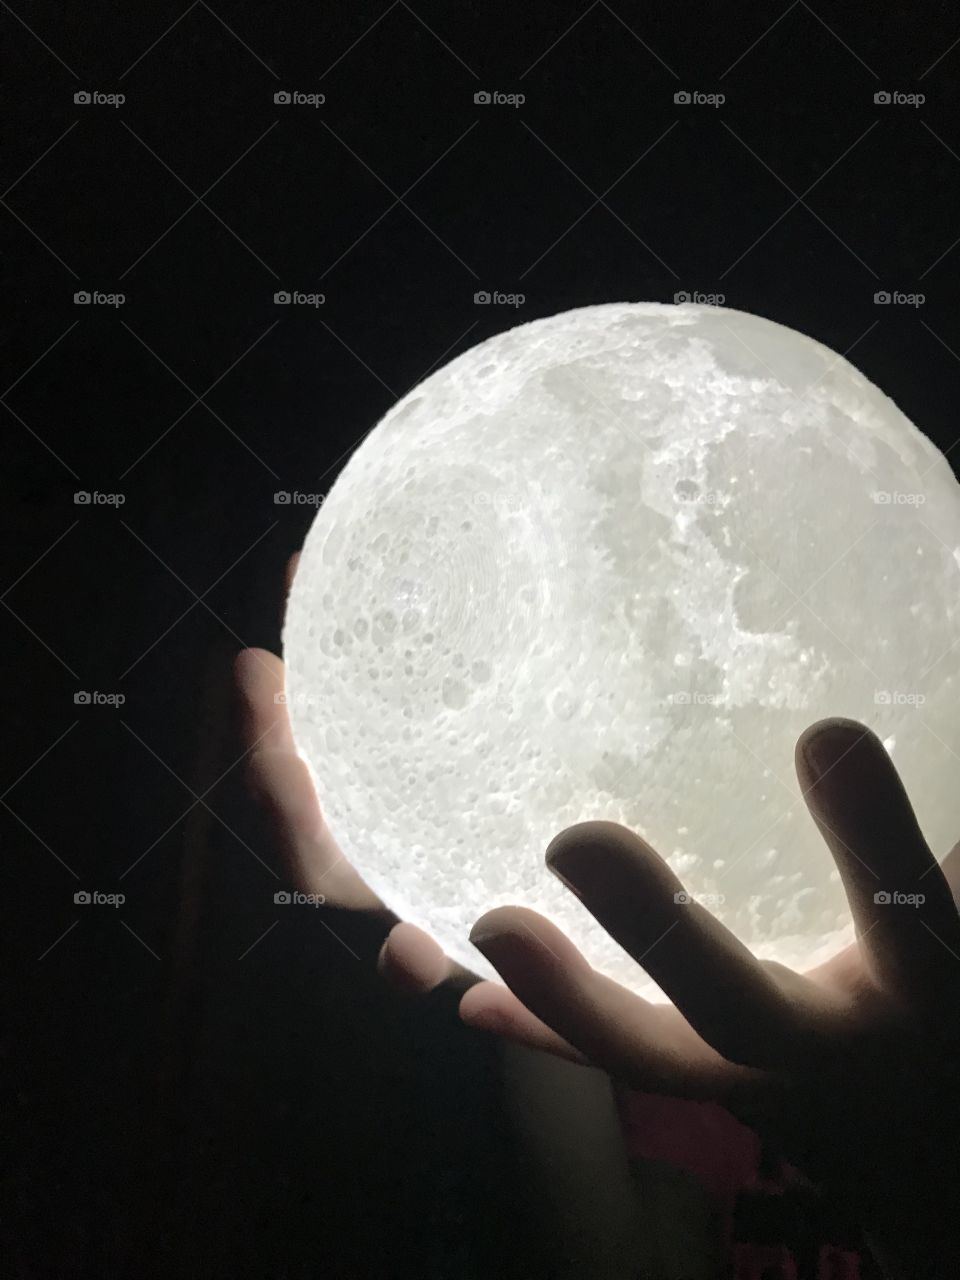 Capturing the moon